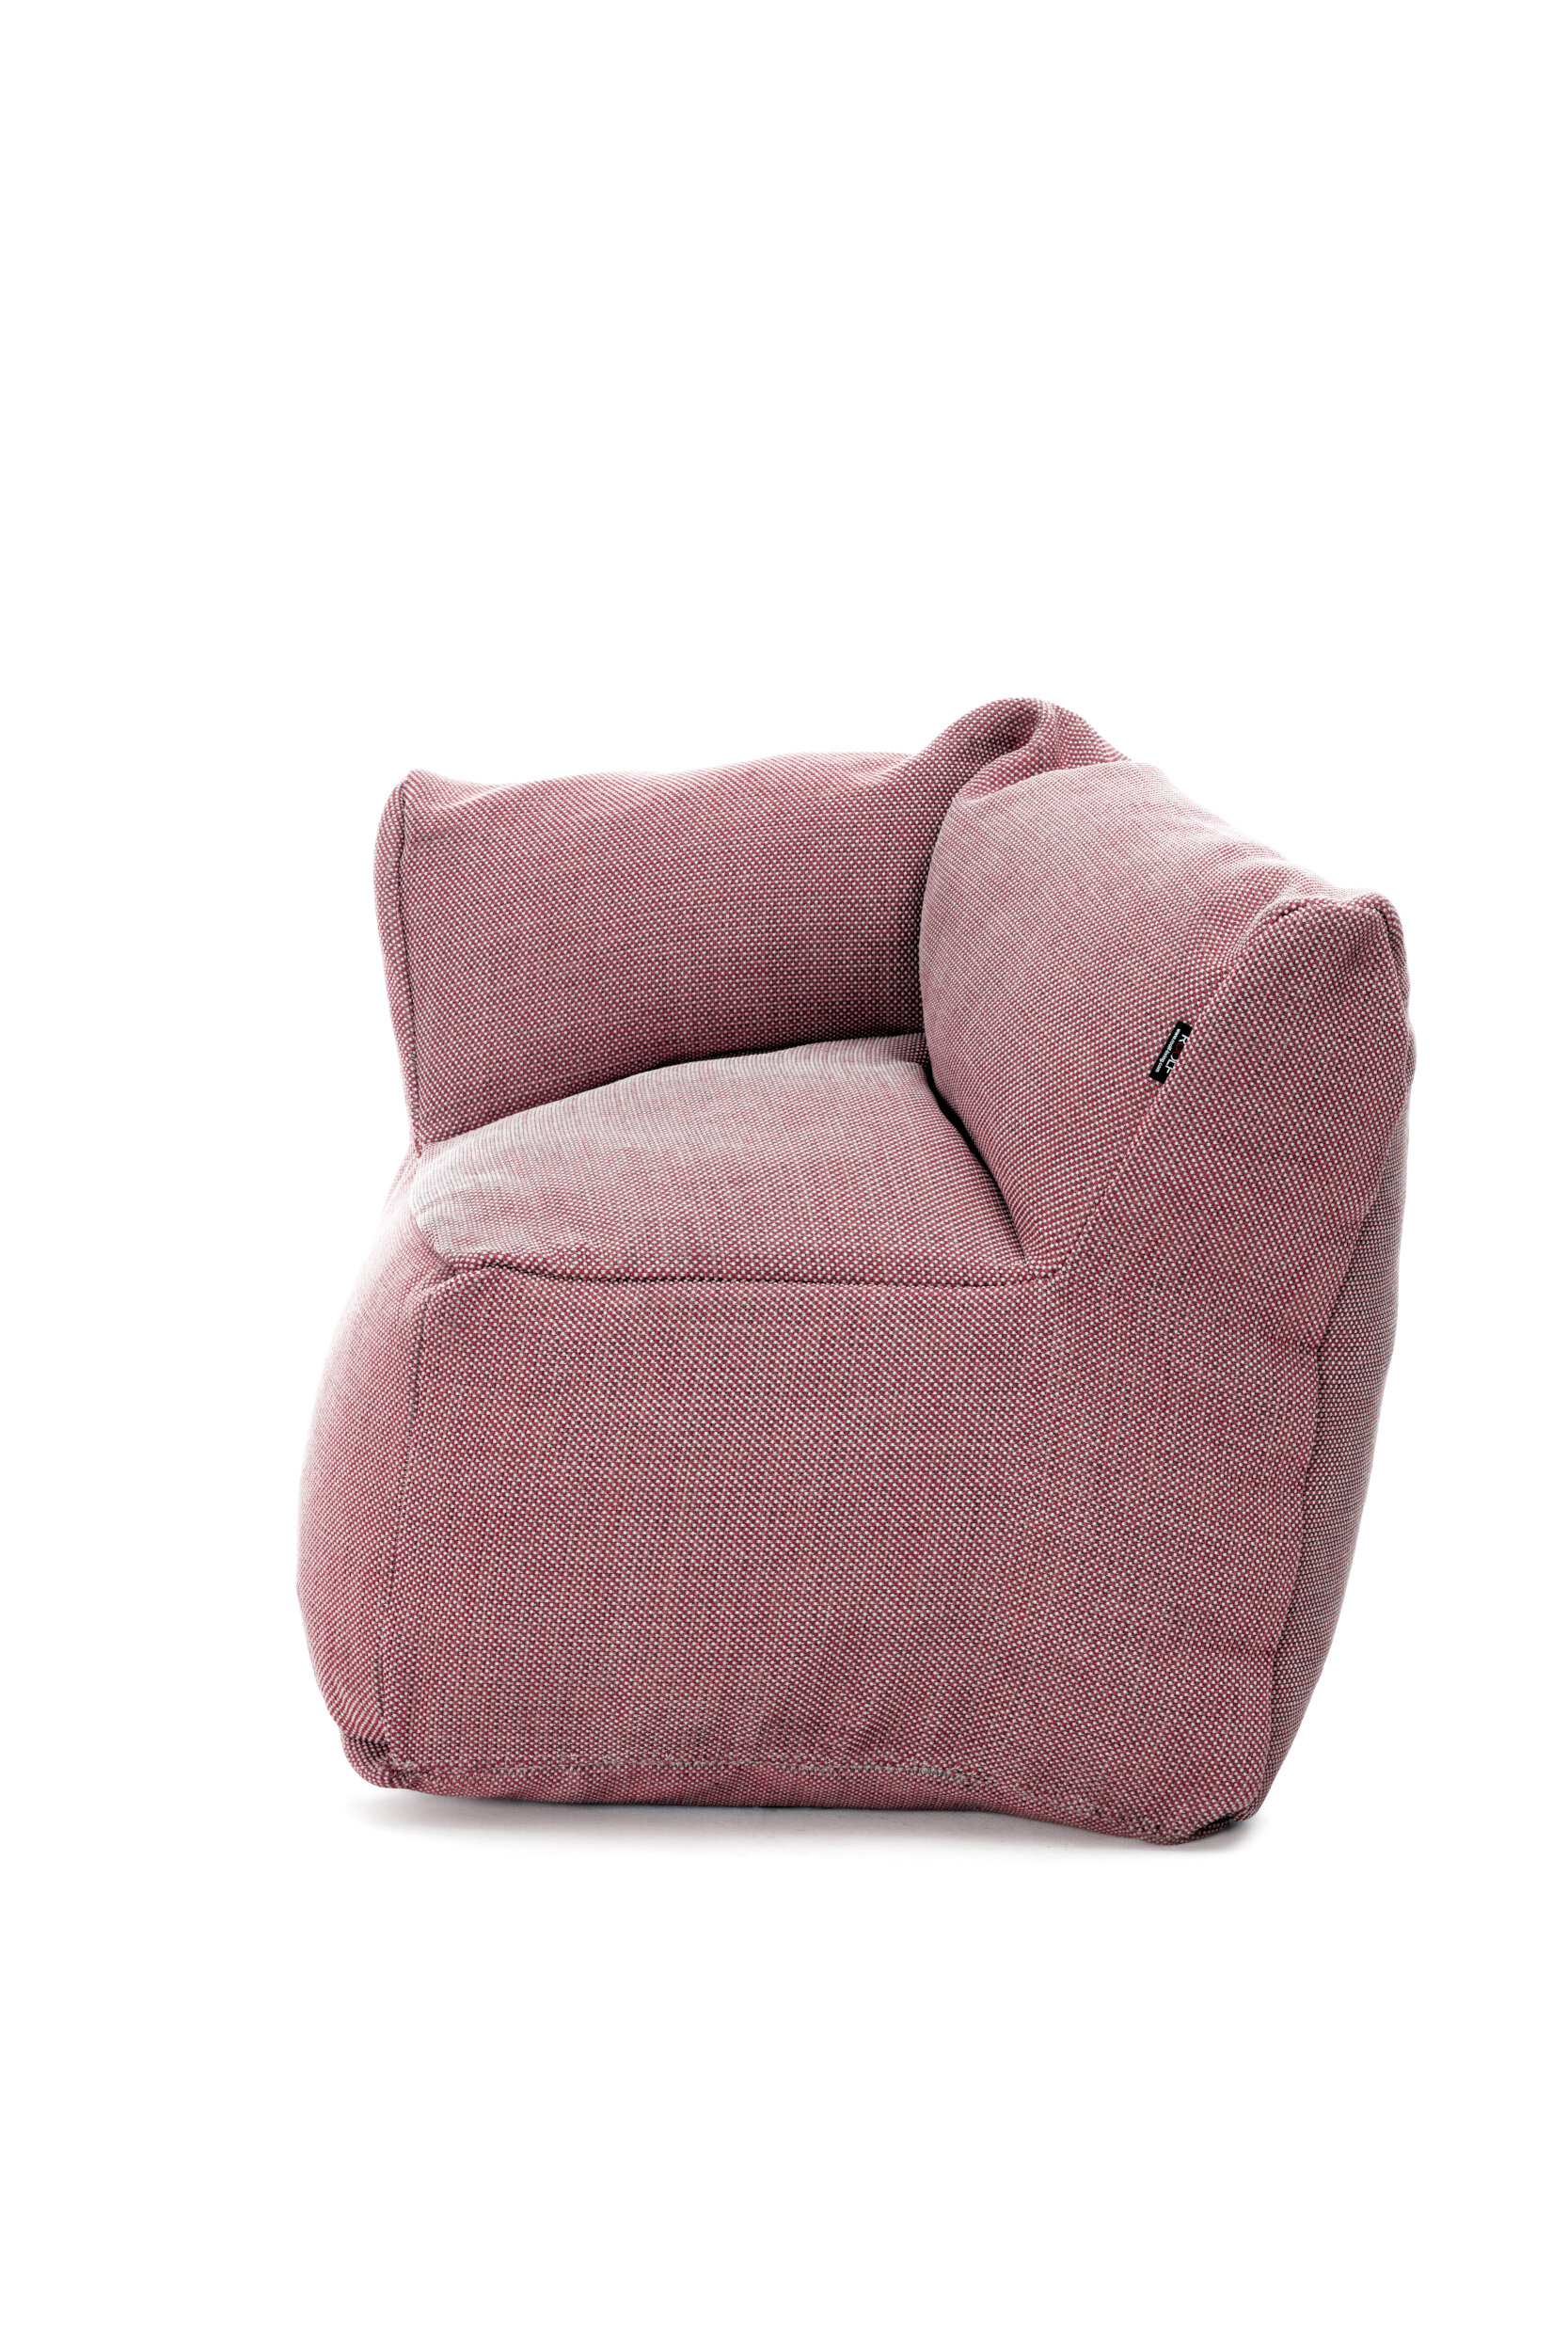 Roolf Outdoor Living Dotty Extra Large Club Corner Pouf Raspberry Front